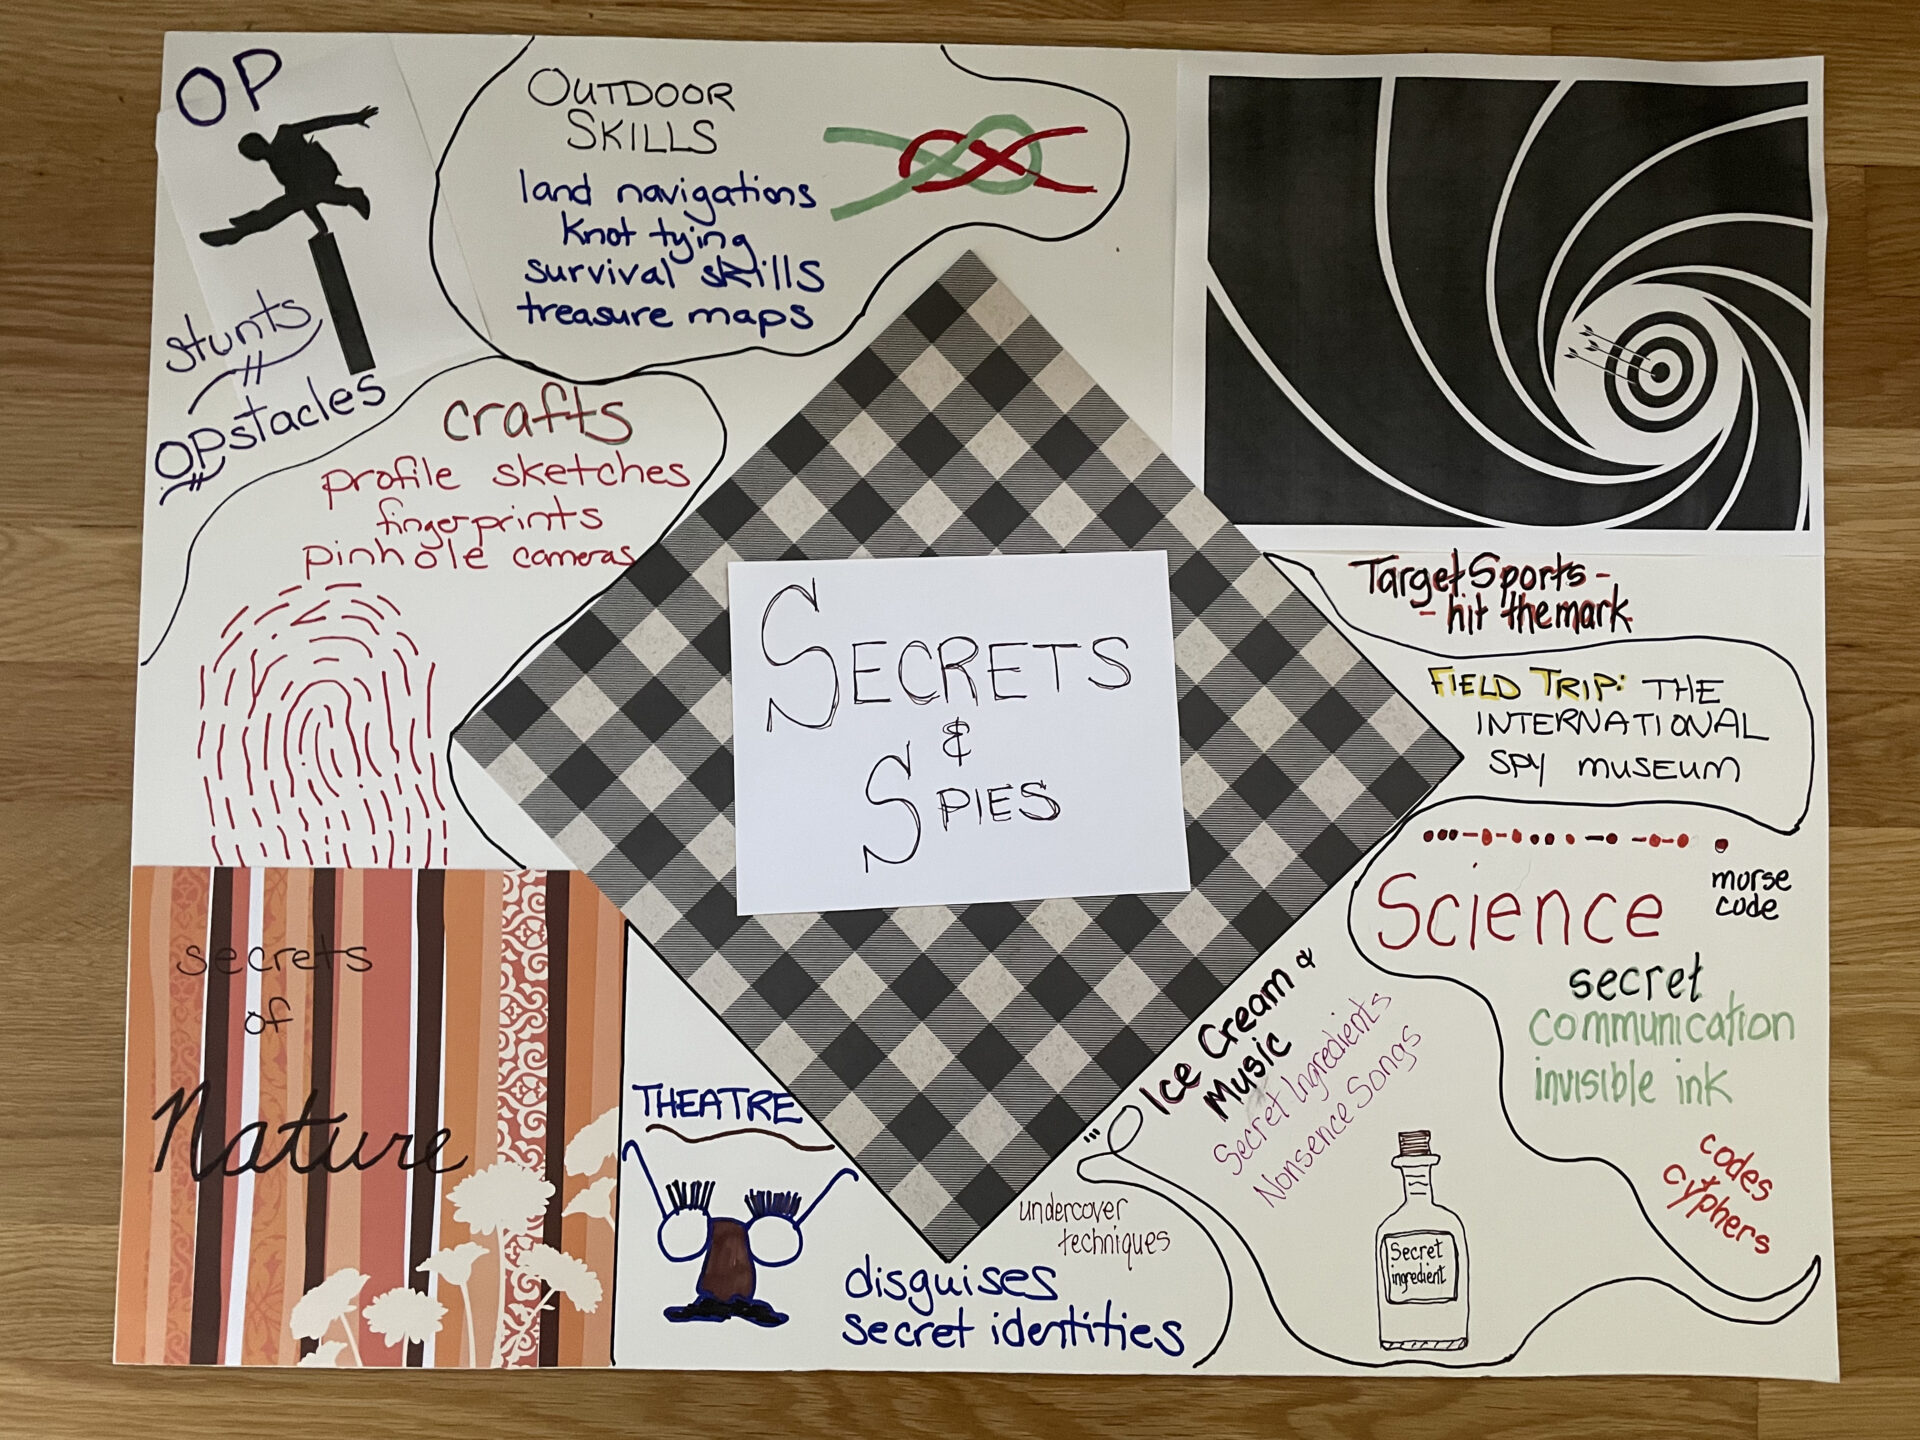 poster for the secrets and spies theme, suggesting activities for various centers and an OG field trip to the spy museum